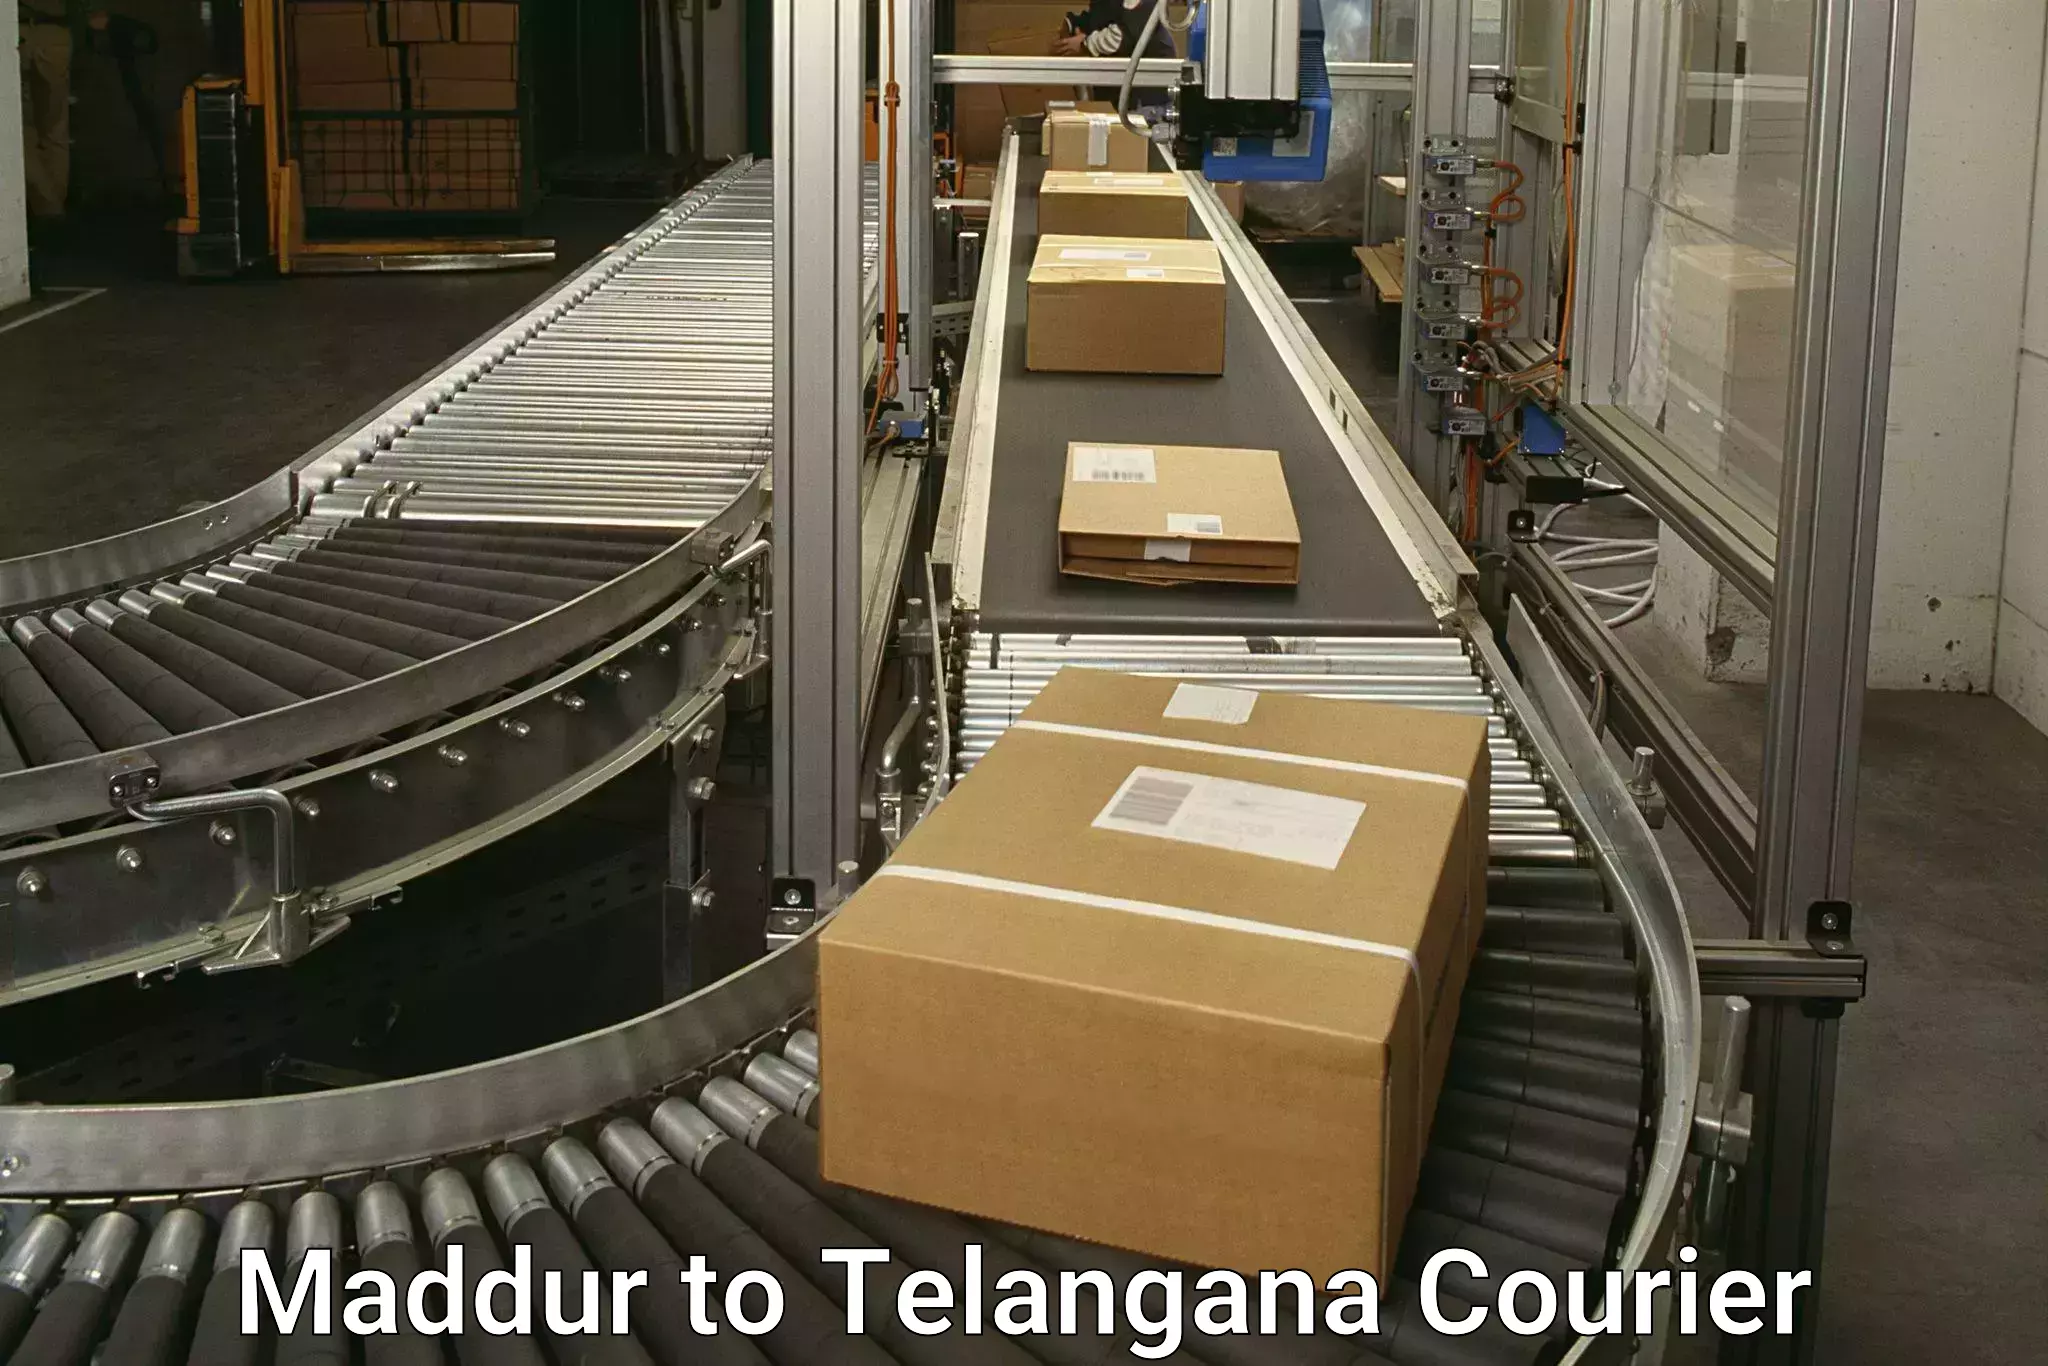 Package tracking in Maddur to Sikanderguda